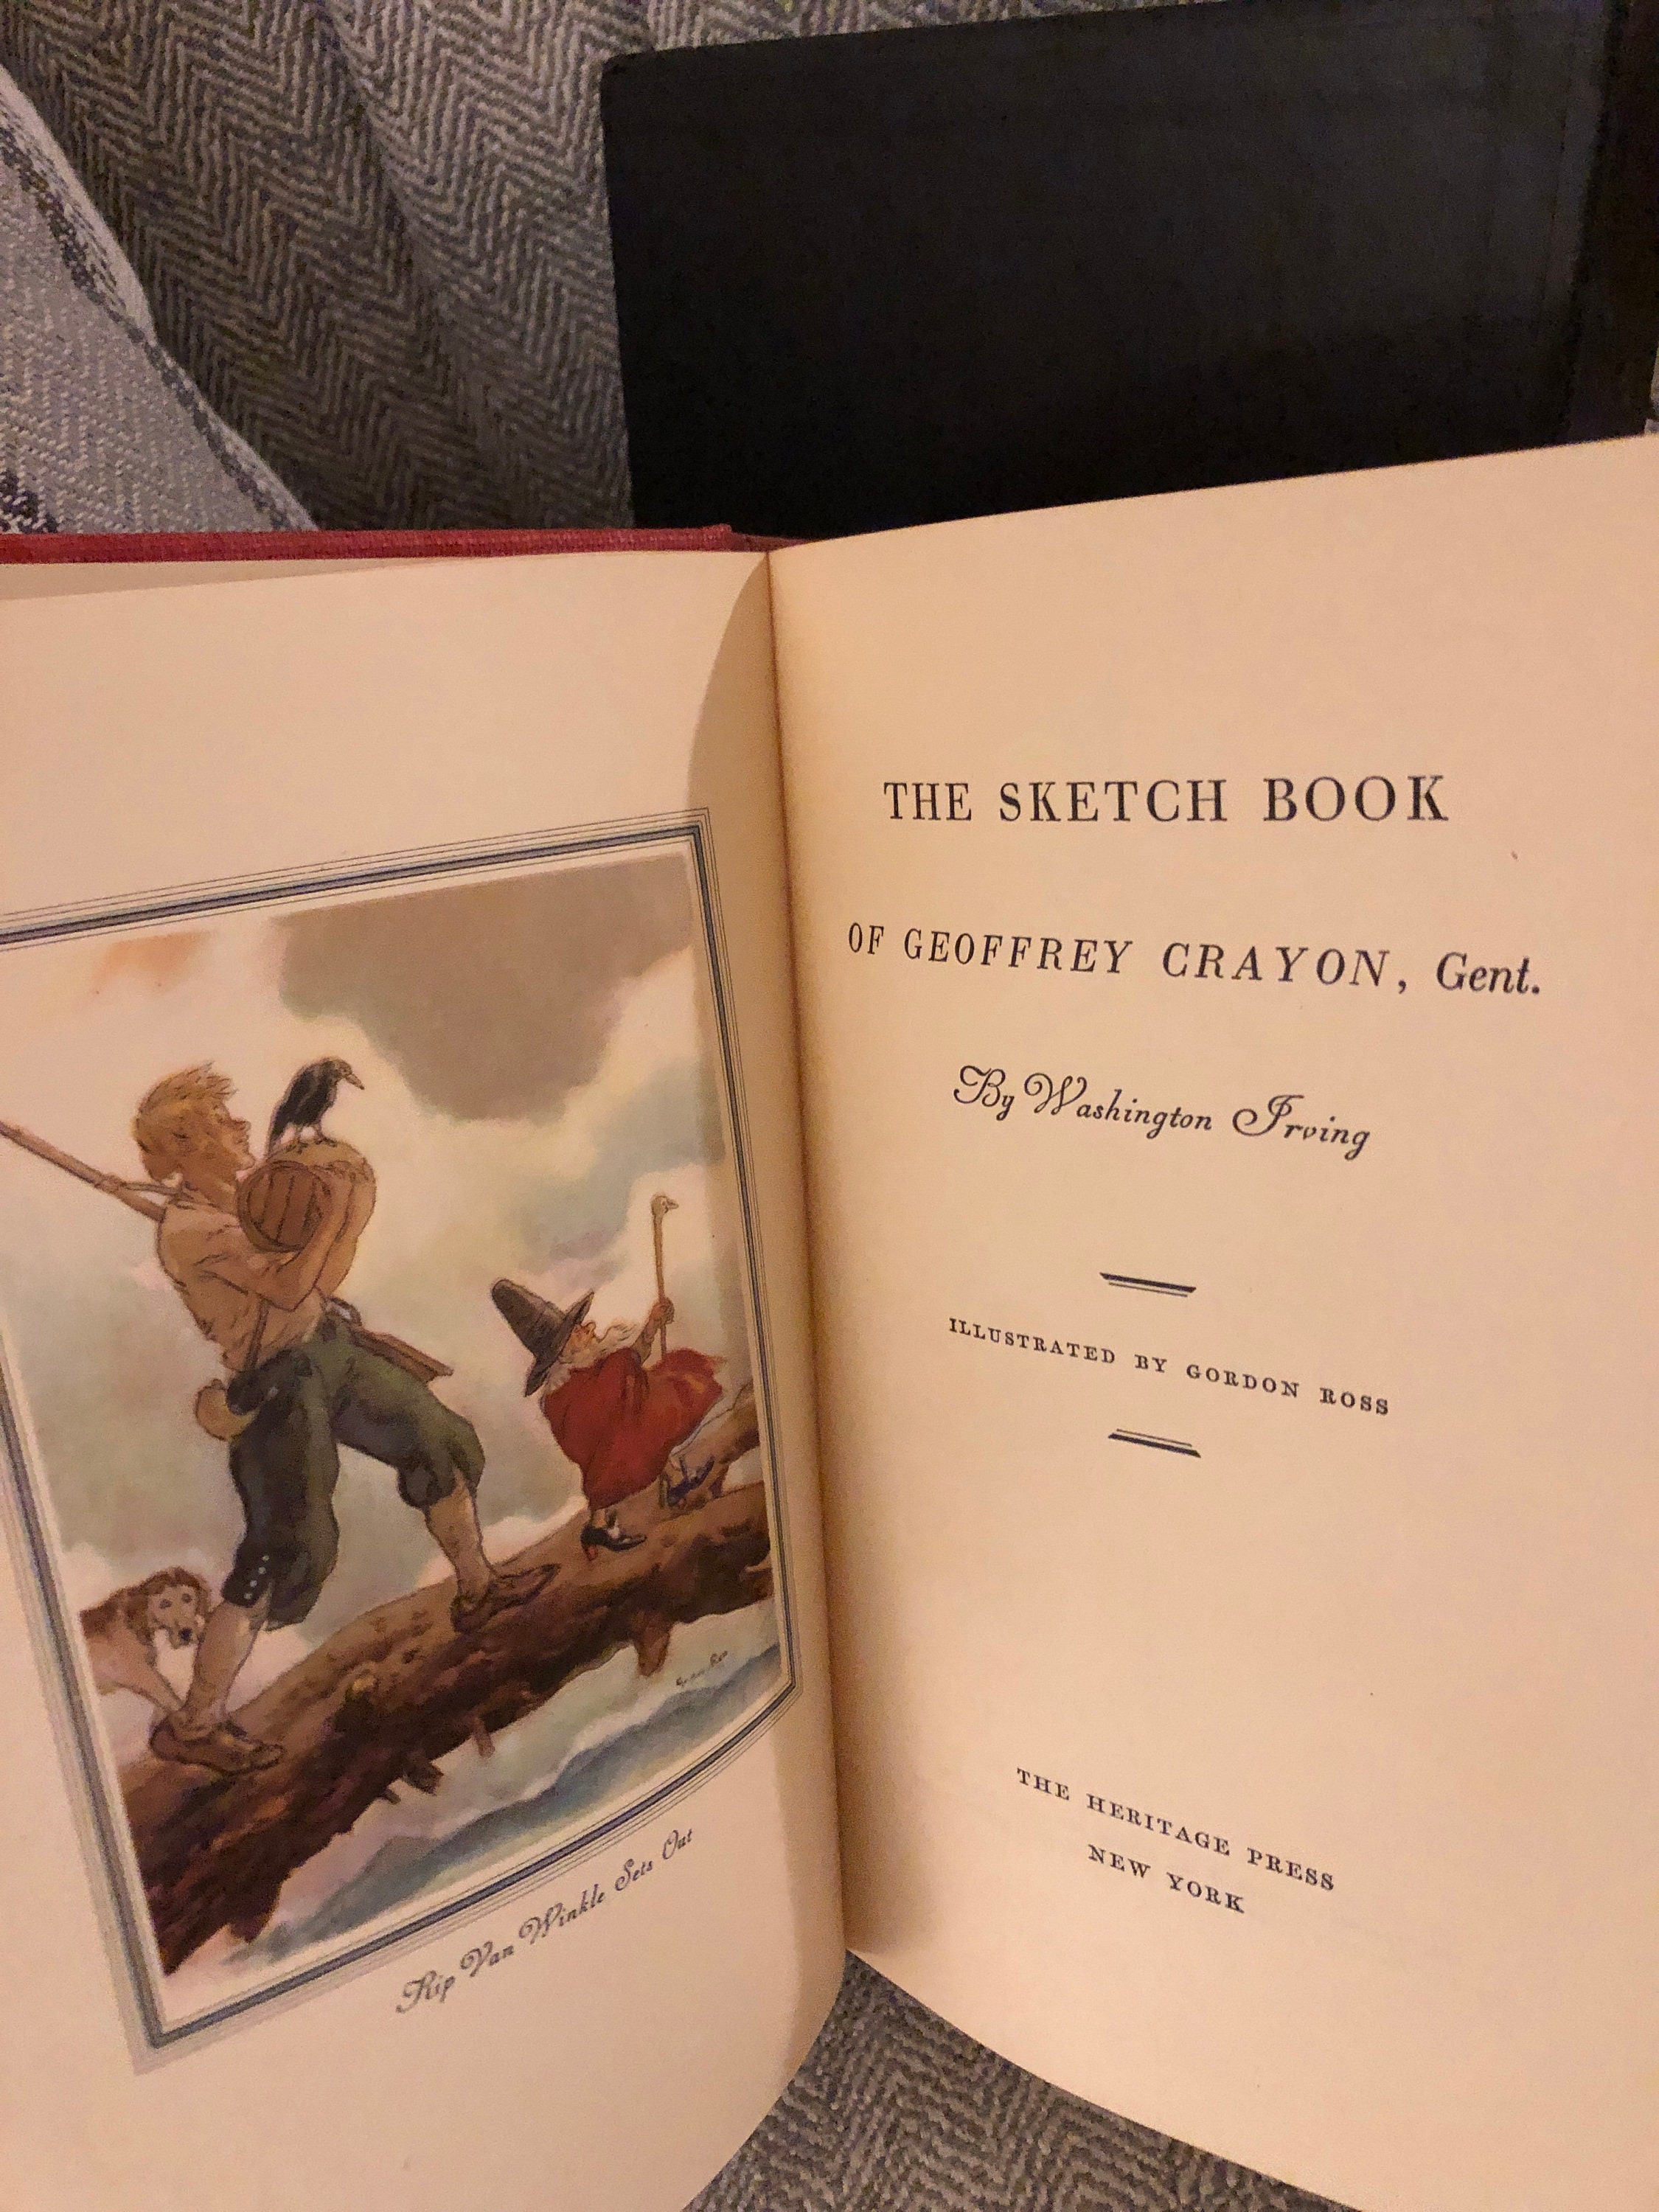 THE SKETCH BOOK OF GEOFFREY CRAYON. by [Washington Irving].: (1845)